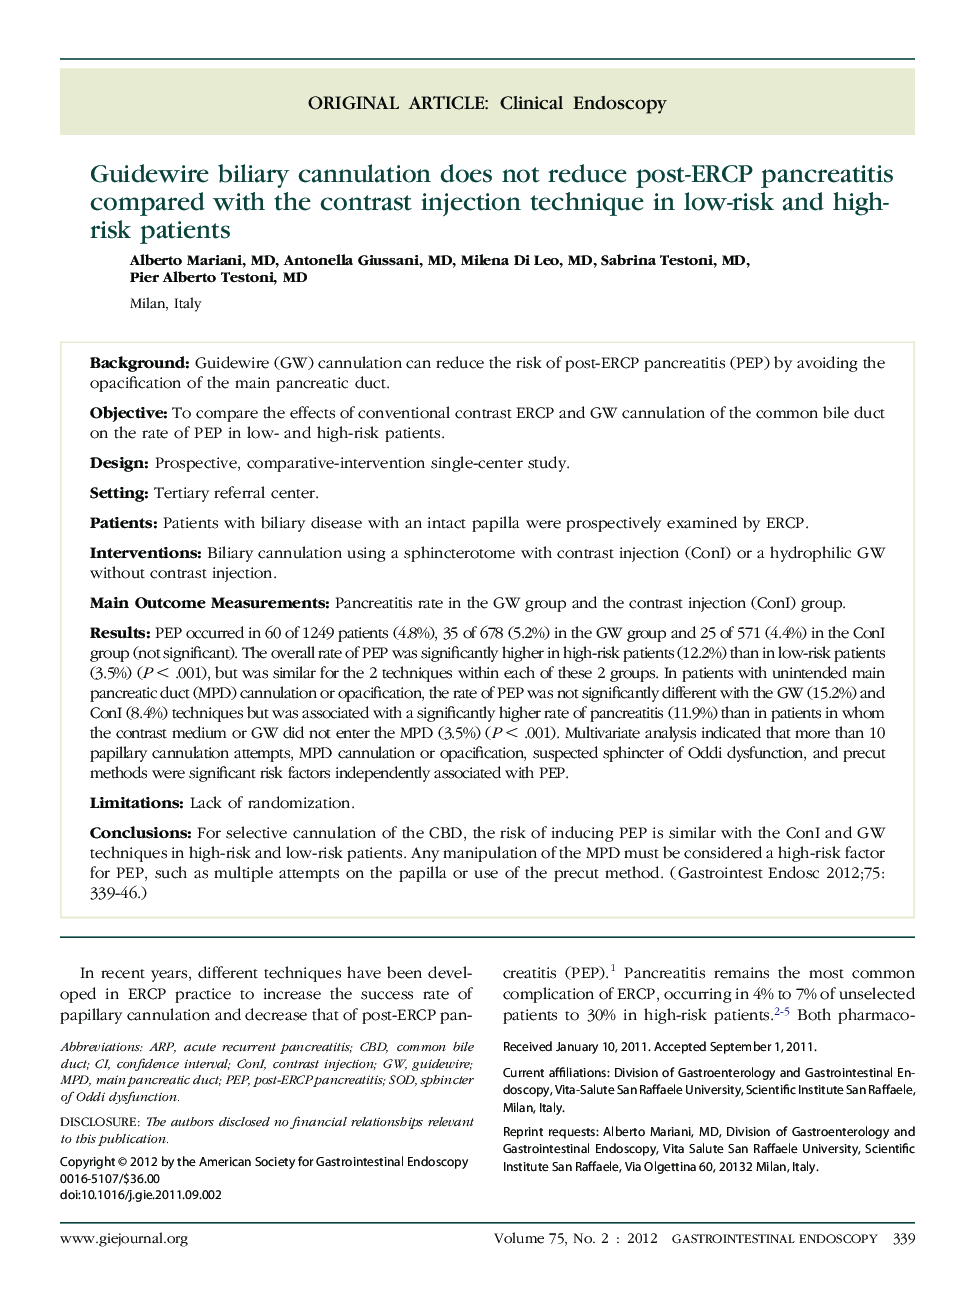 Guidewire biliary cannulation does not reduce post-ERCP pancreatitis compared with the contrast injection technique in low-risk and high-risk patients 